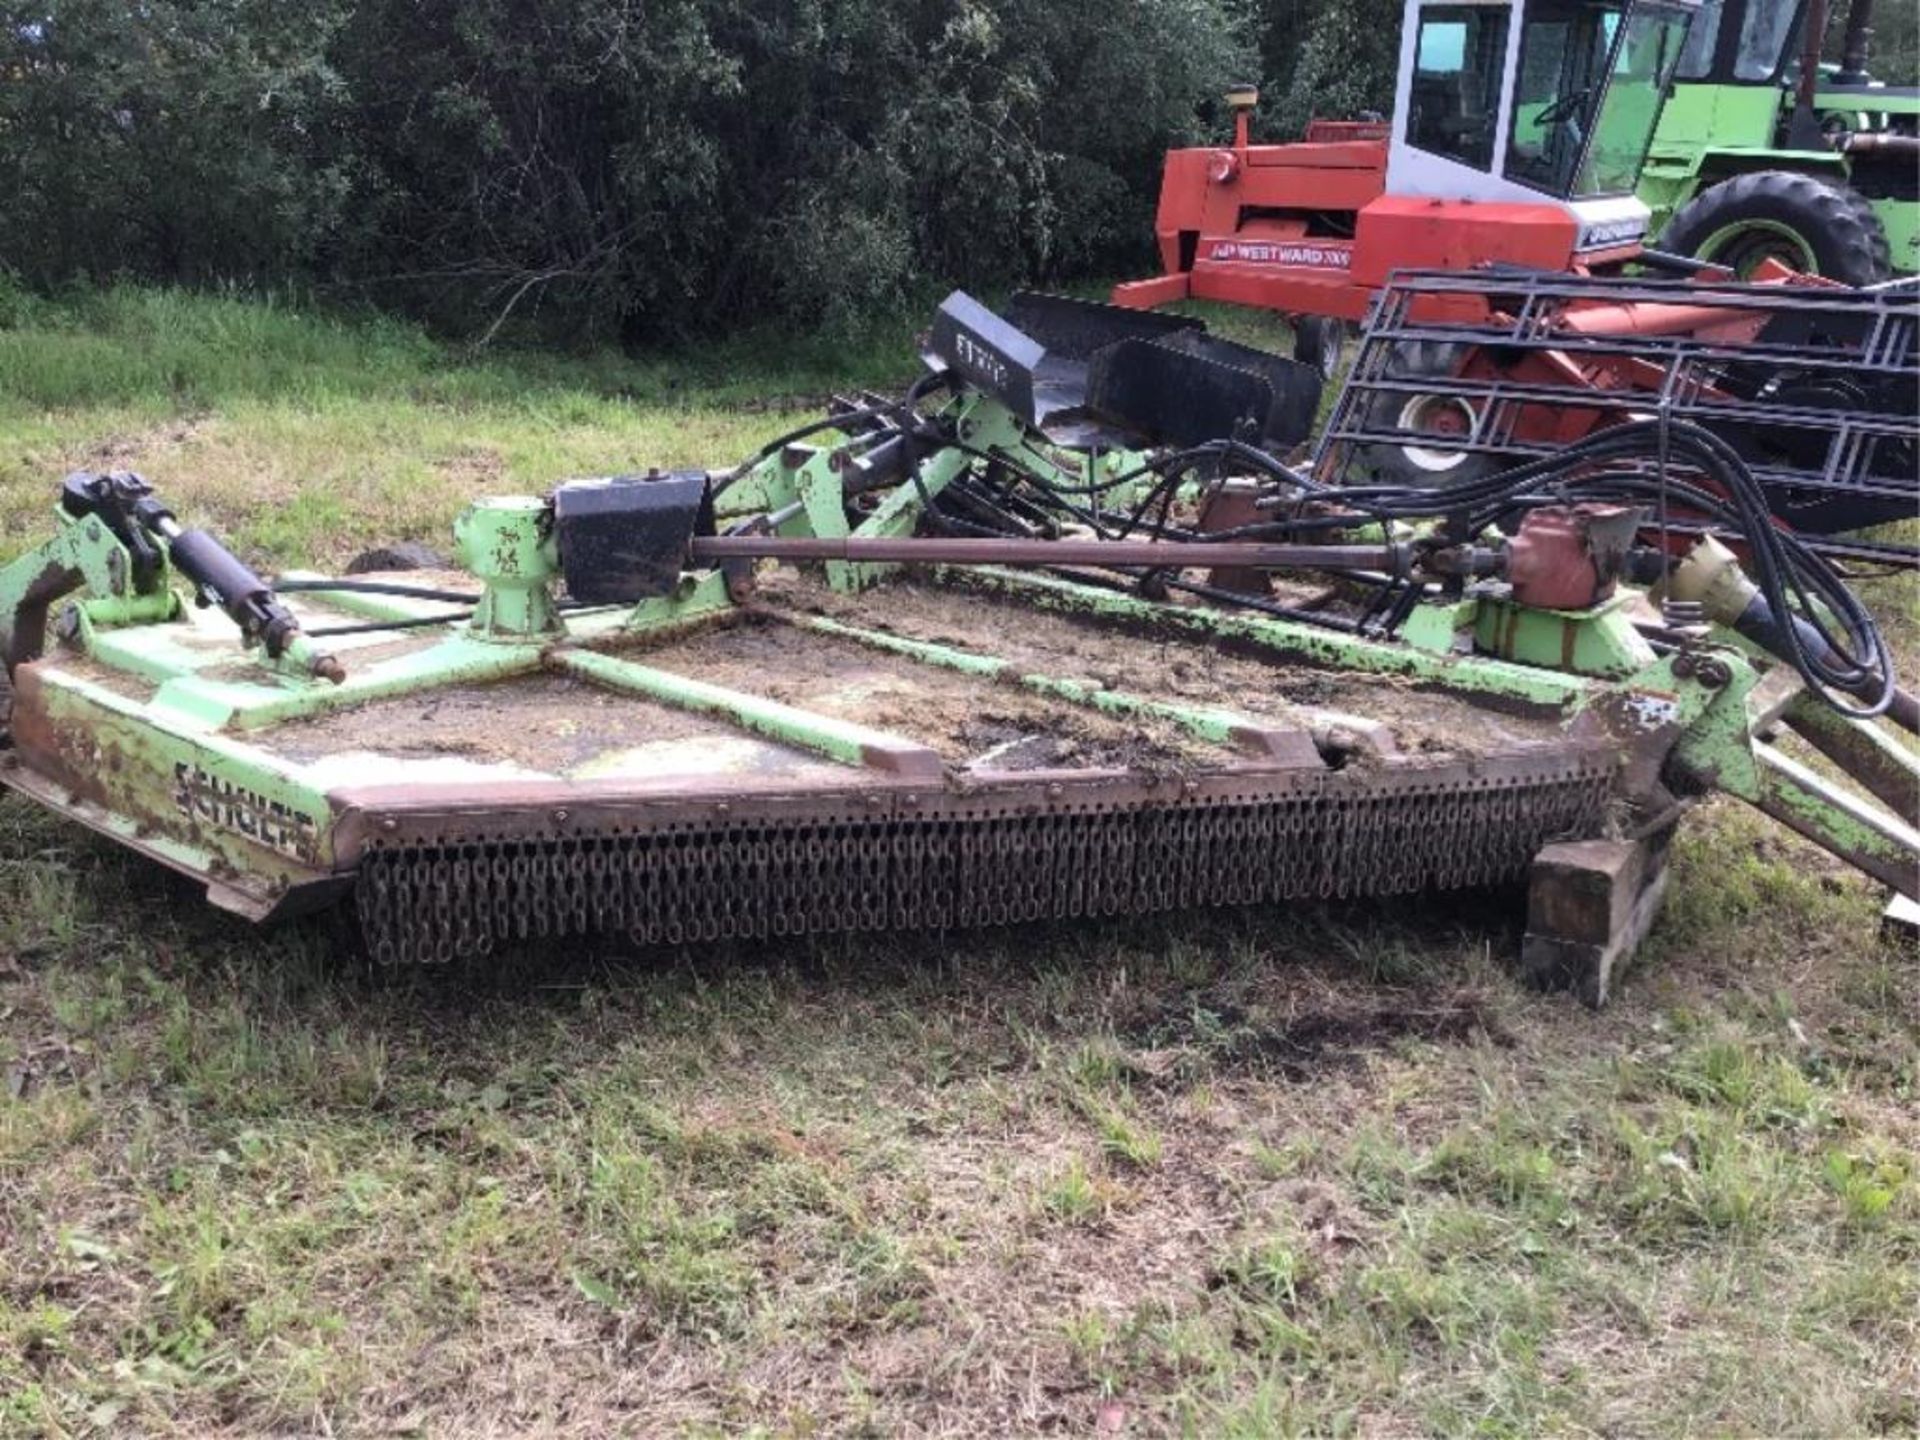 Schulte 15Ft Batwing Mower Drive Shaft to 1 Wing is Broke. Gear Box needs Repaired. - Image 2 of 5